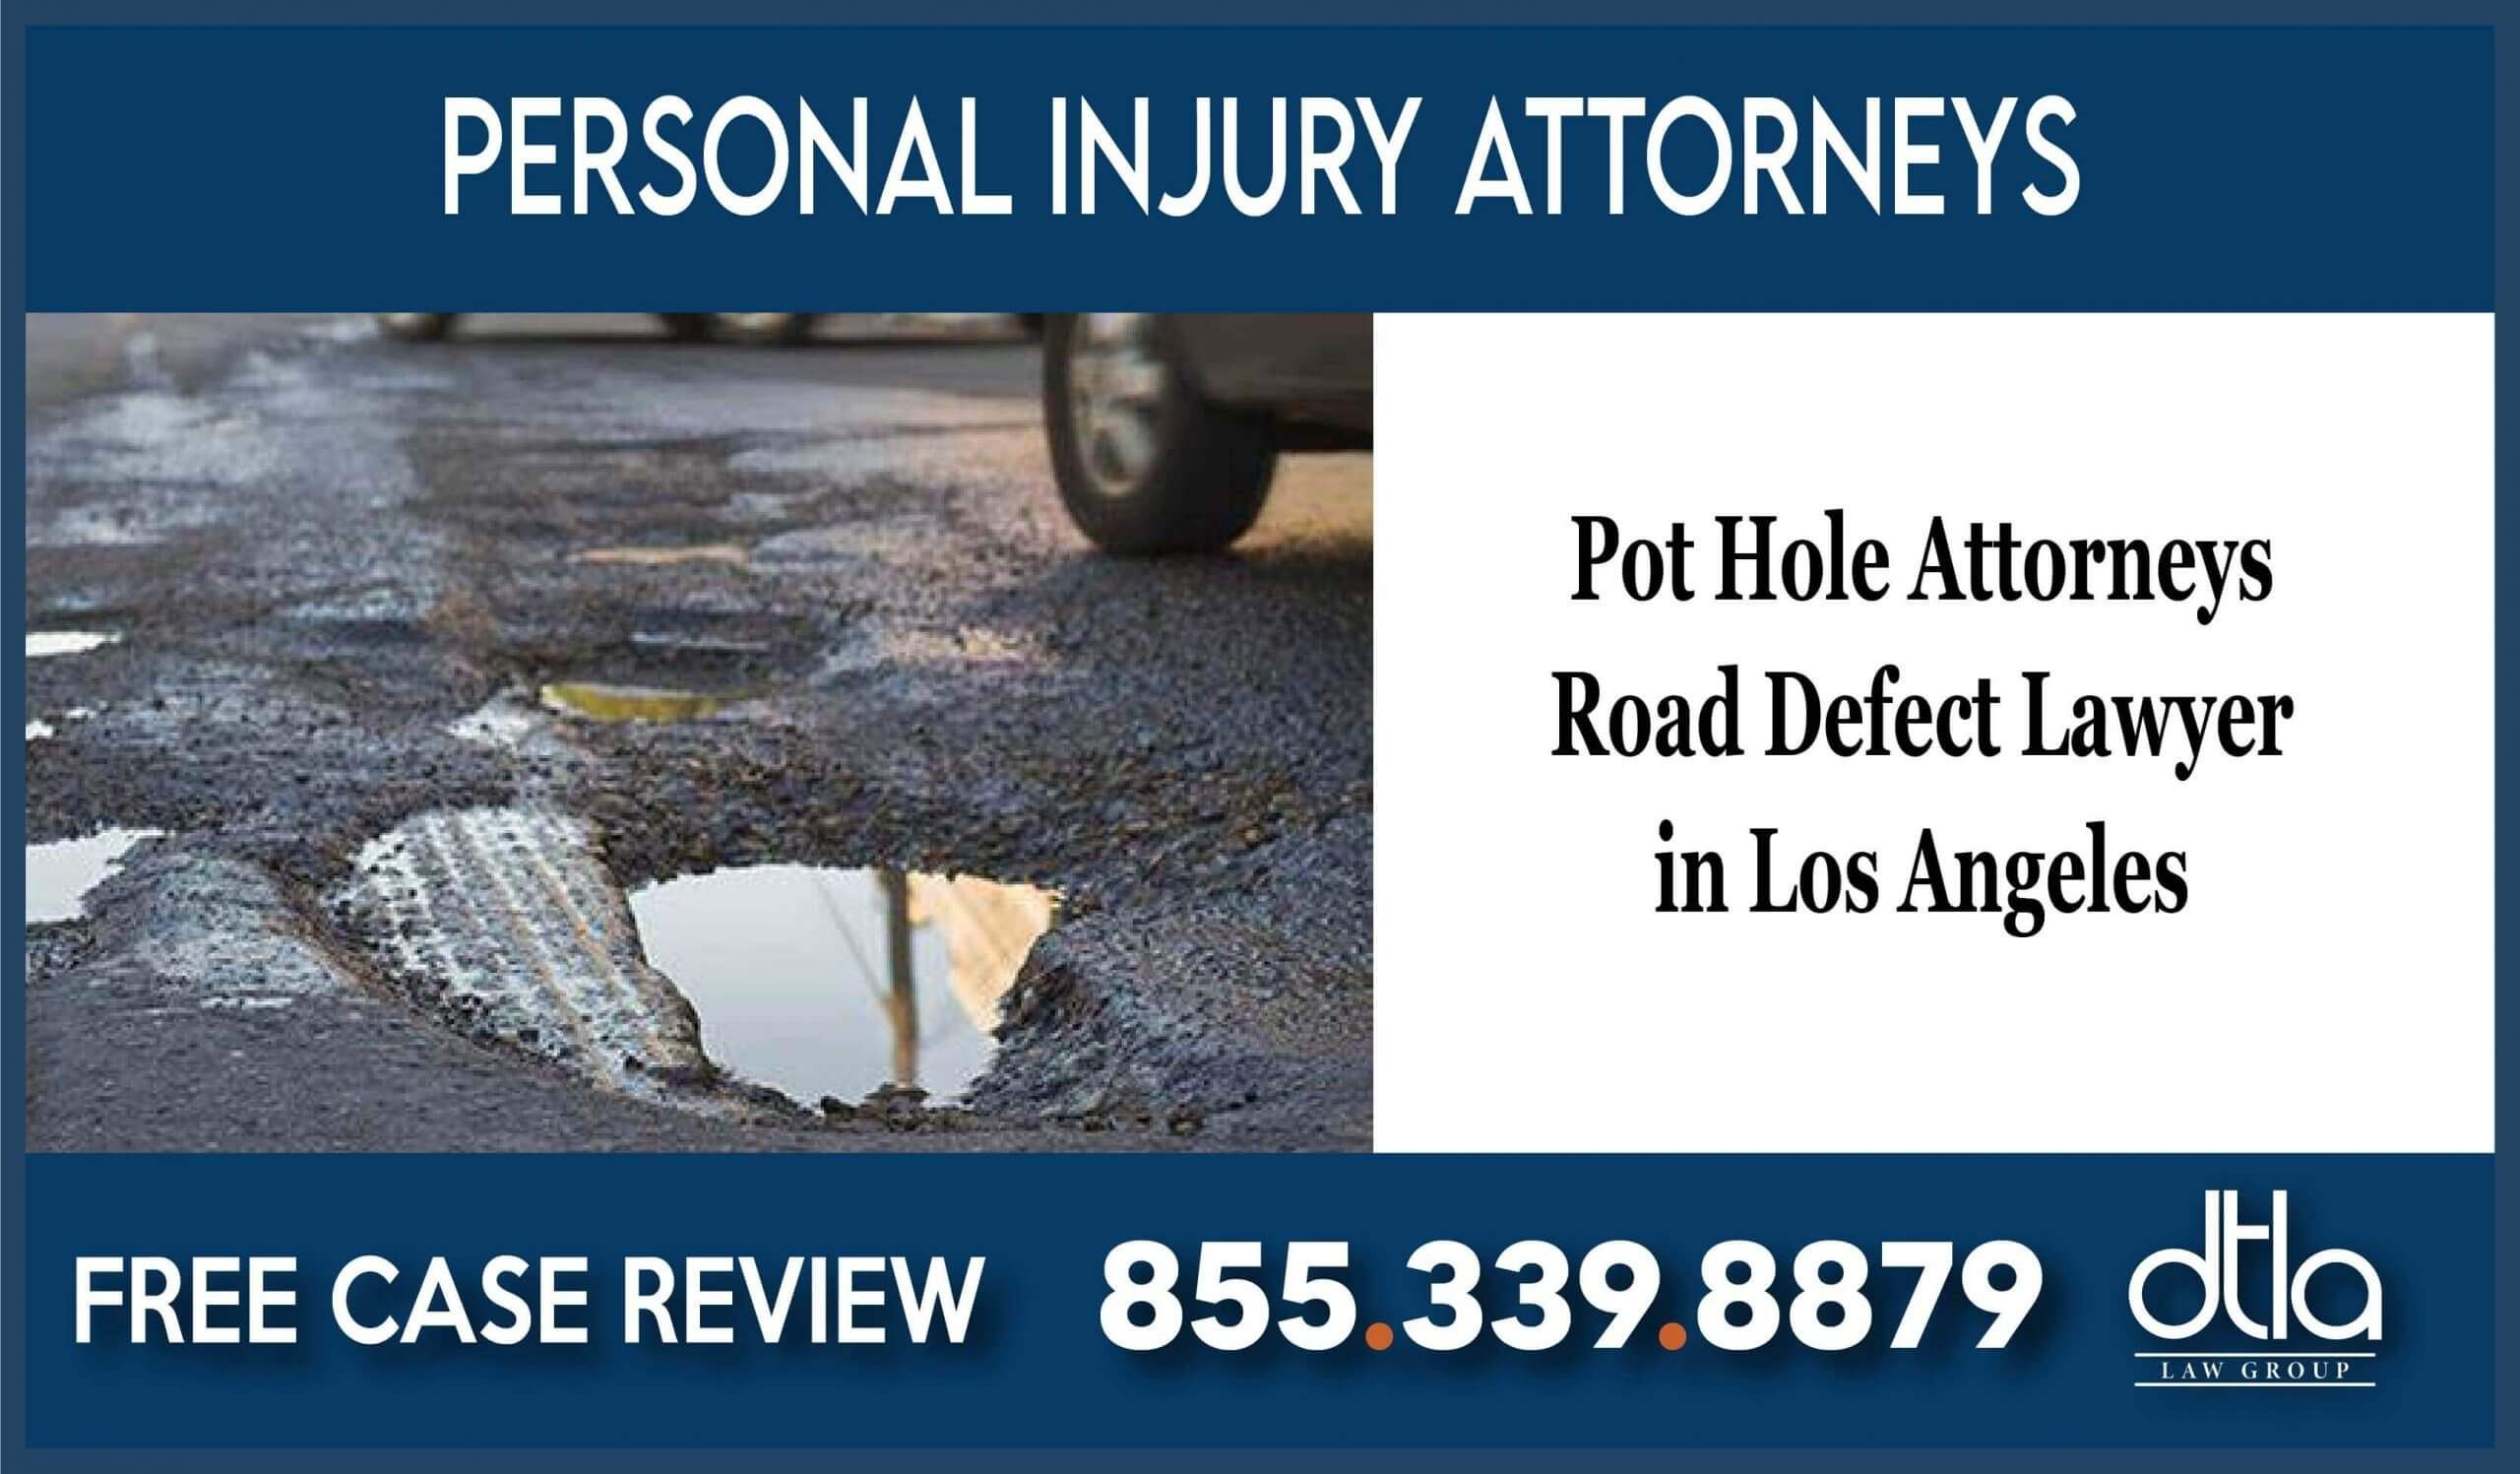 Pot Hole Attorneys Road Defect Lawyer in Los Angeles personal injury attorney lawsuit